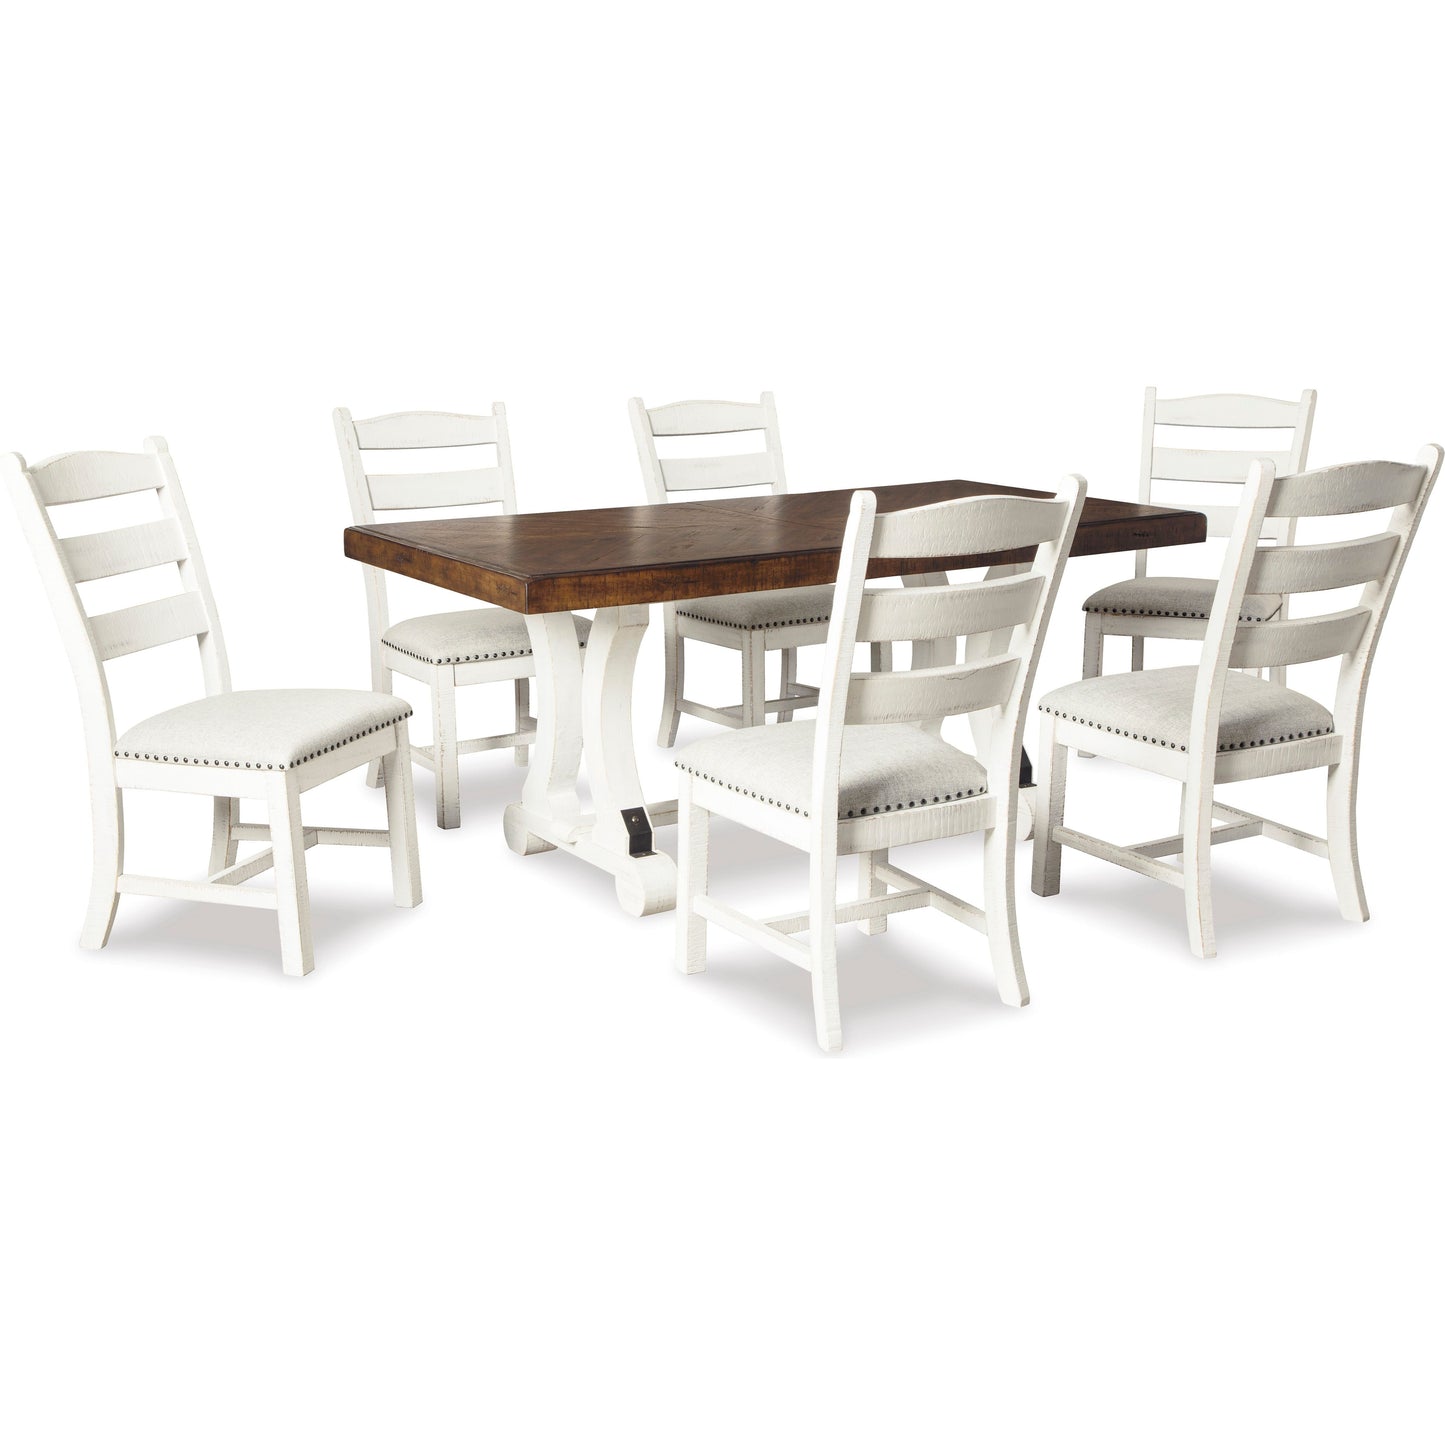 VALEBECK DINING SET - 6 CHAIRS & TABLE